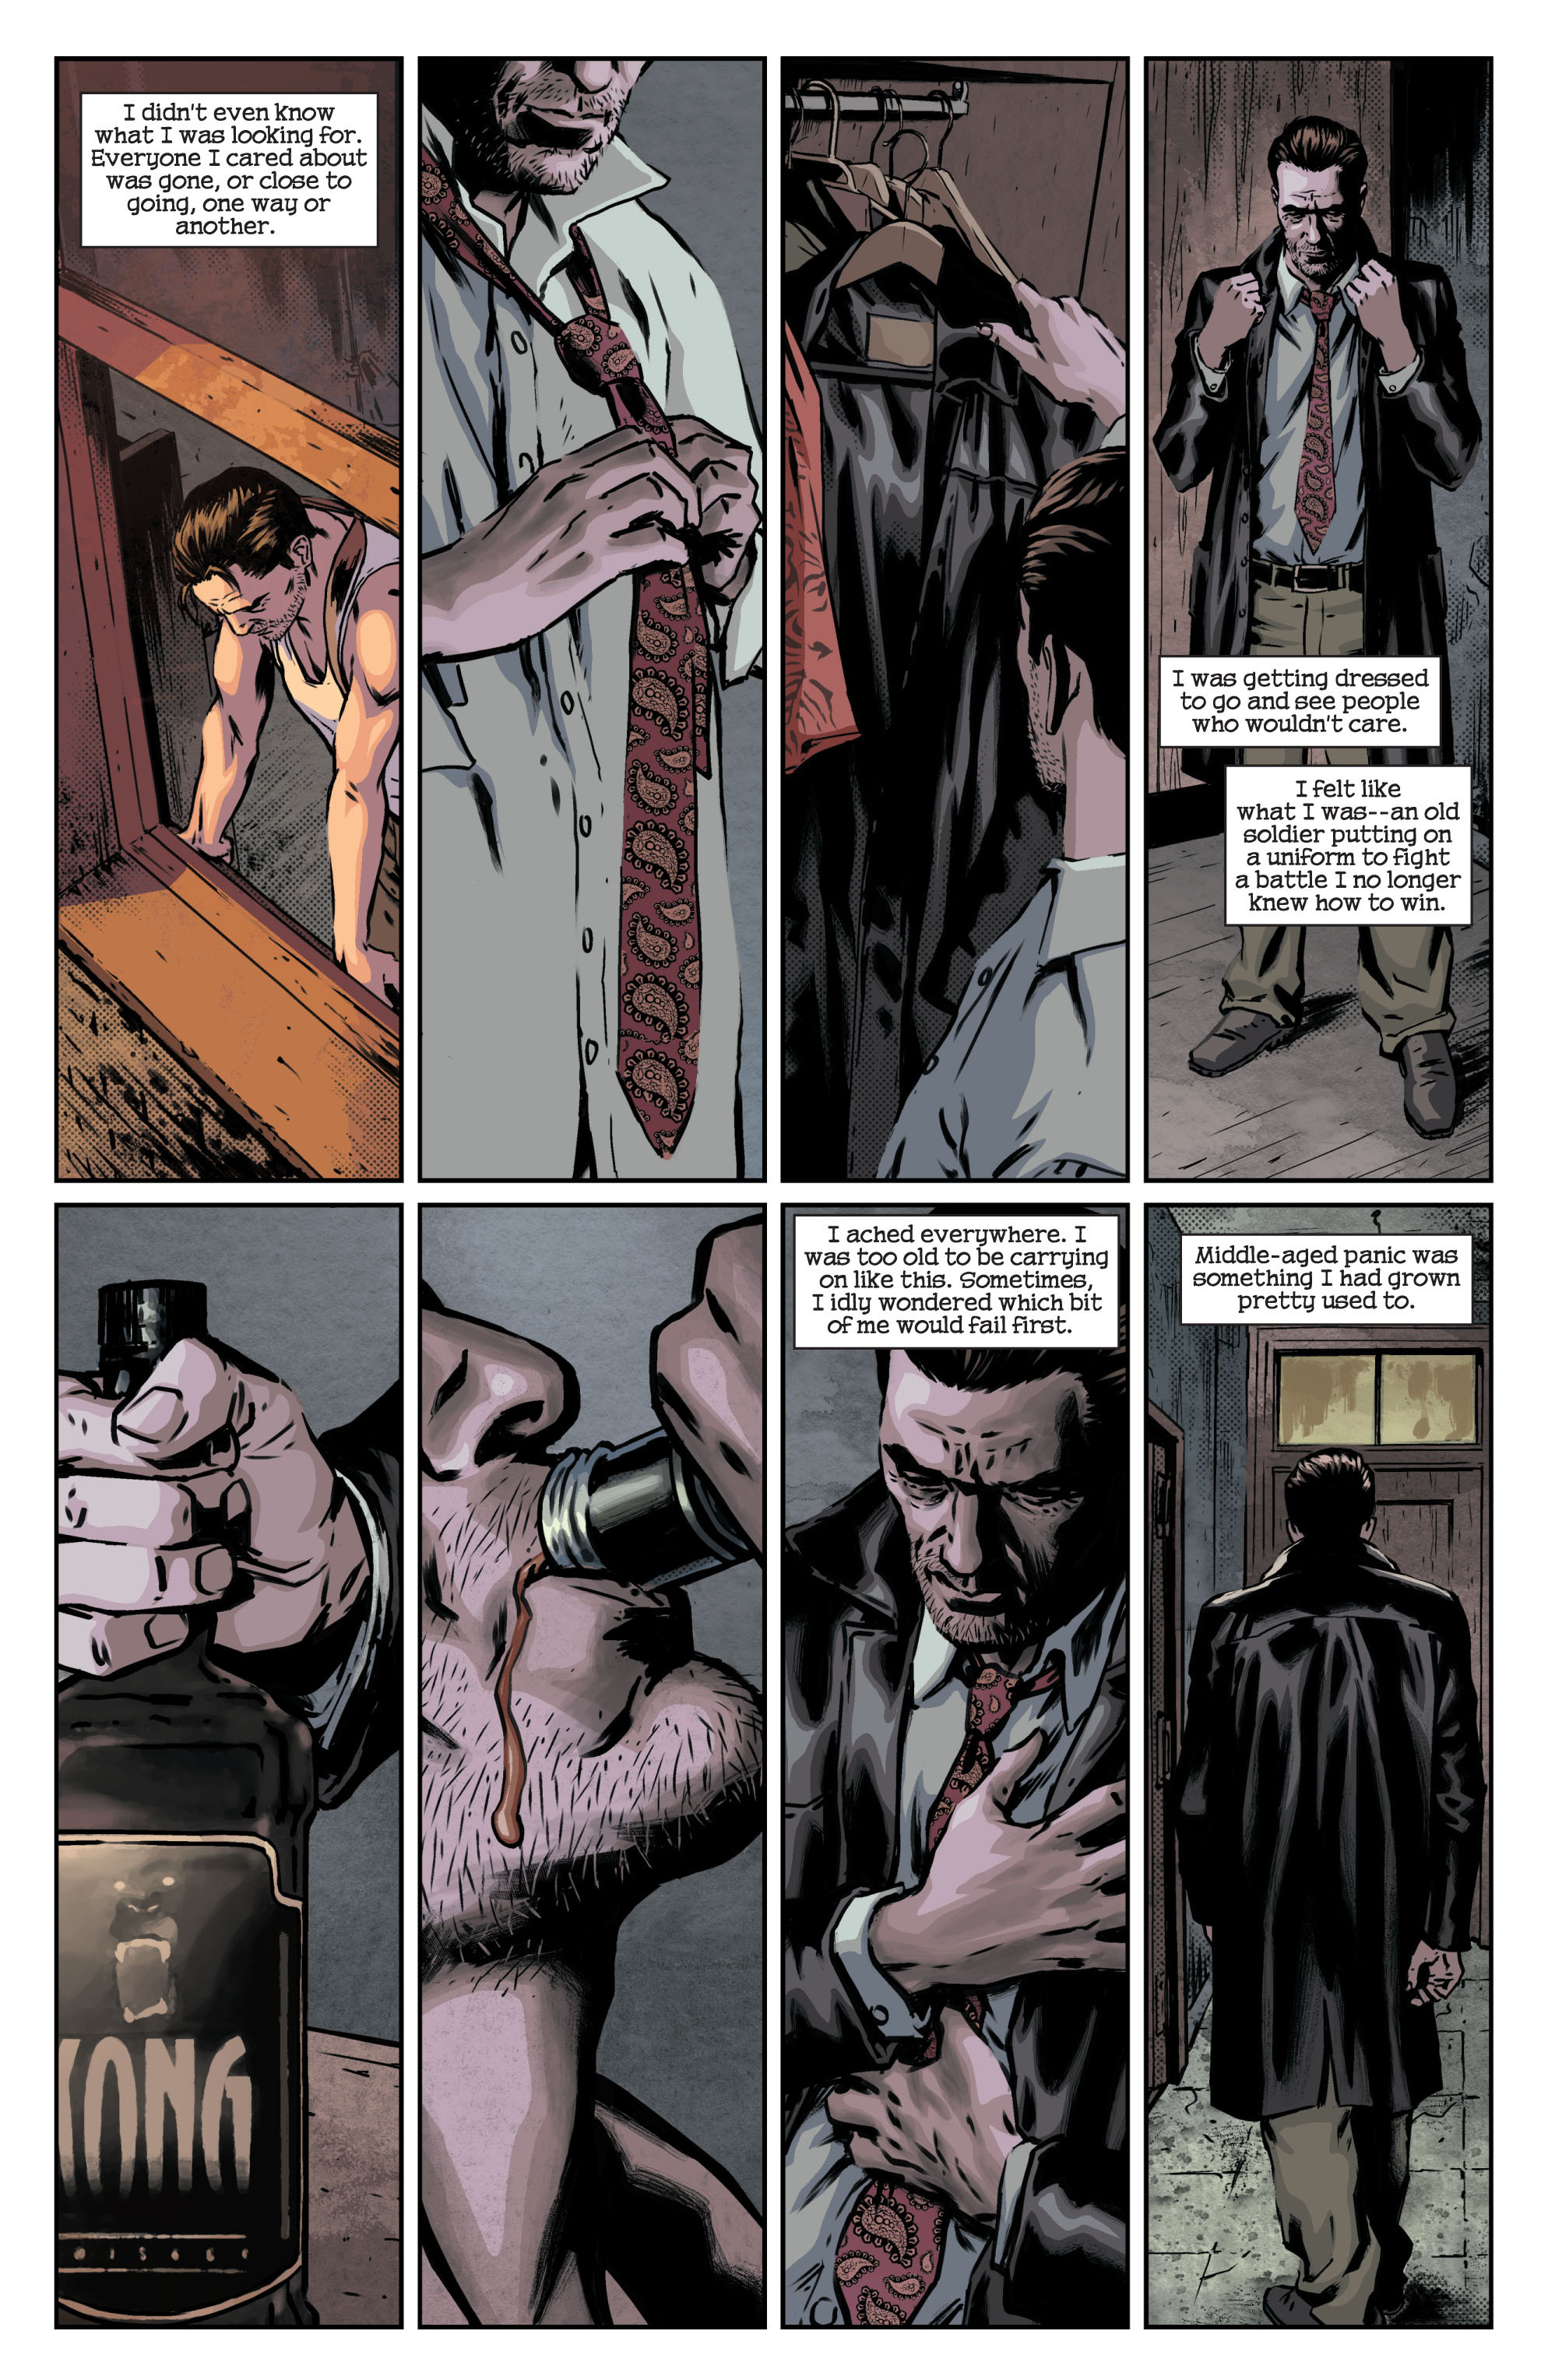 Part one of Max Payne 3 comic out now, read it for free – Destructoid